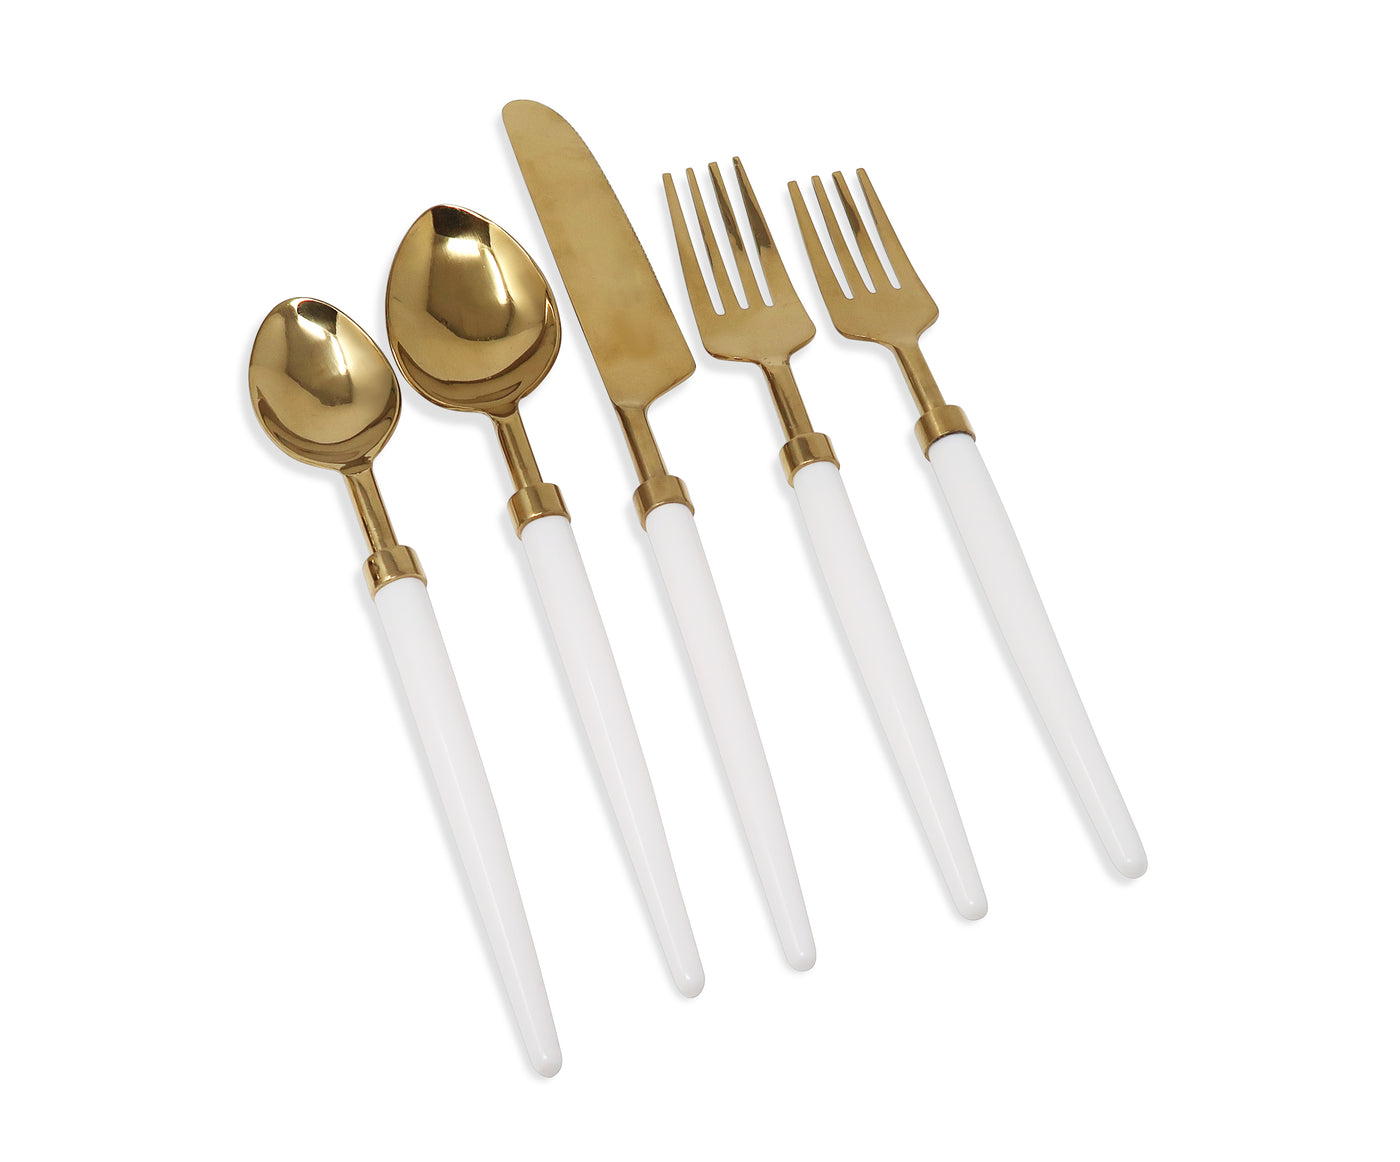 20 Pc Flatware Set Gold with Pointy Handles - Service for 4 - Dishwasher Safe